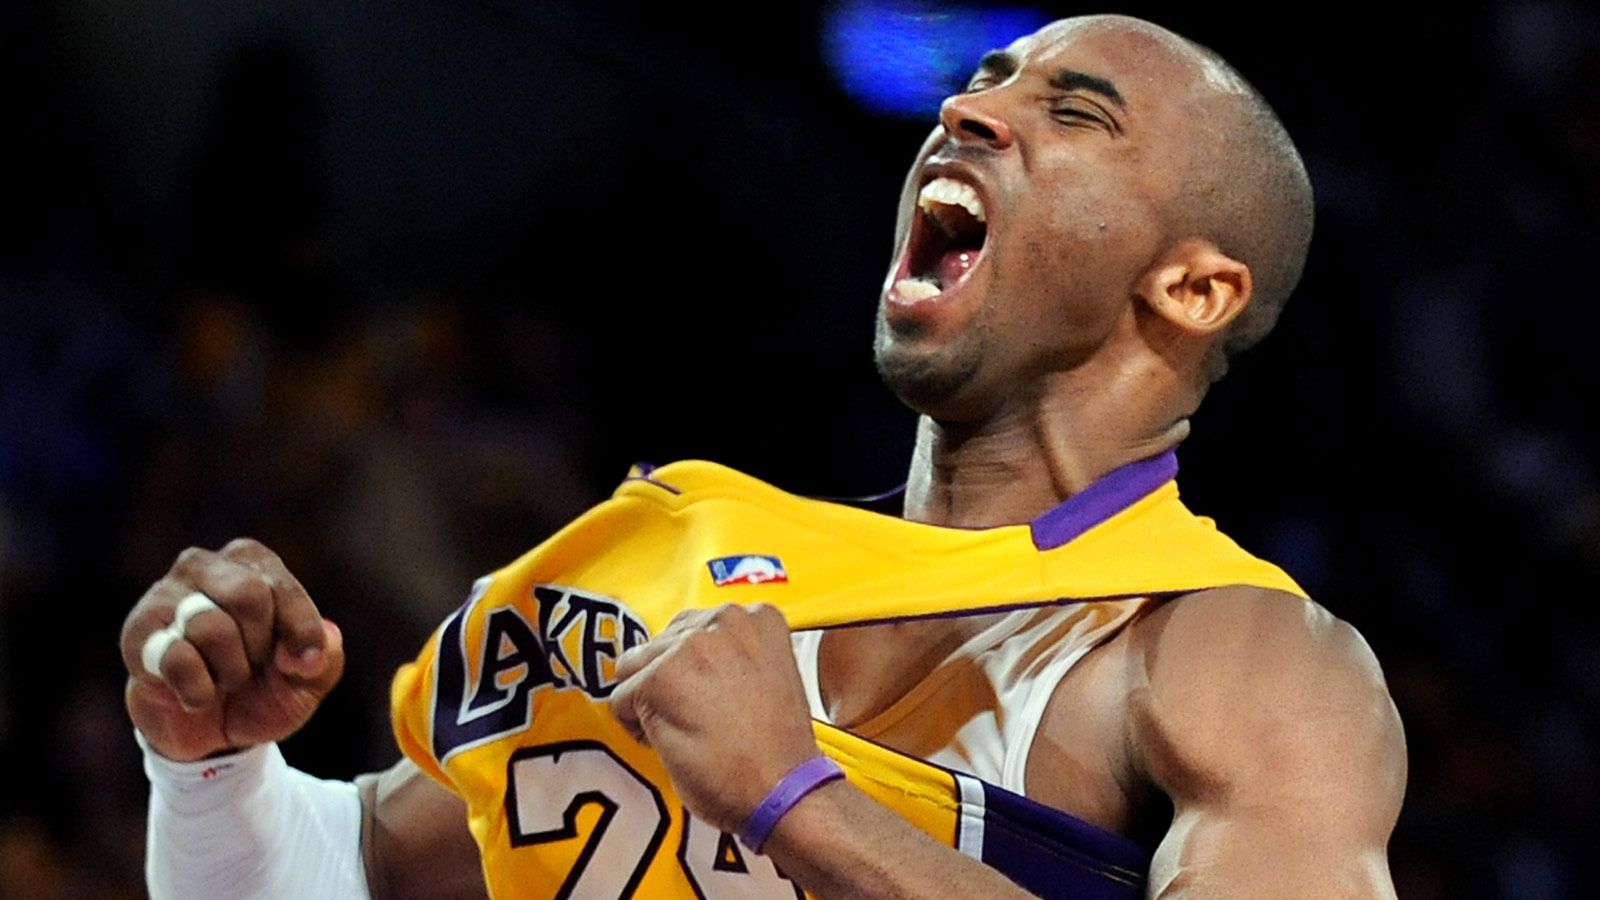 An NFL Legend Says Kobe Bryant Taught Him How to Autograph Autographs for Fans